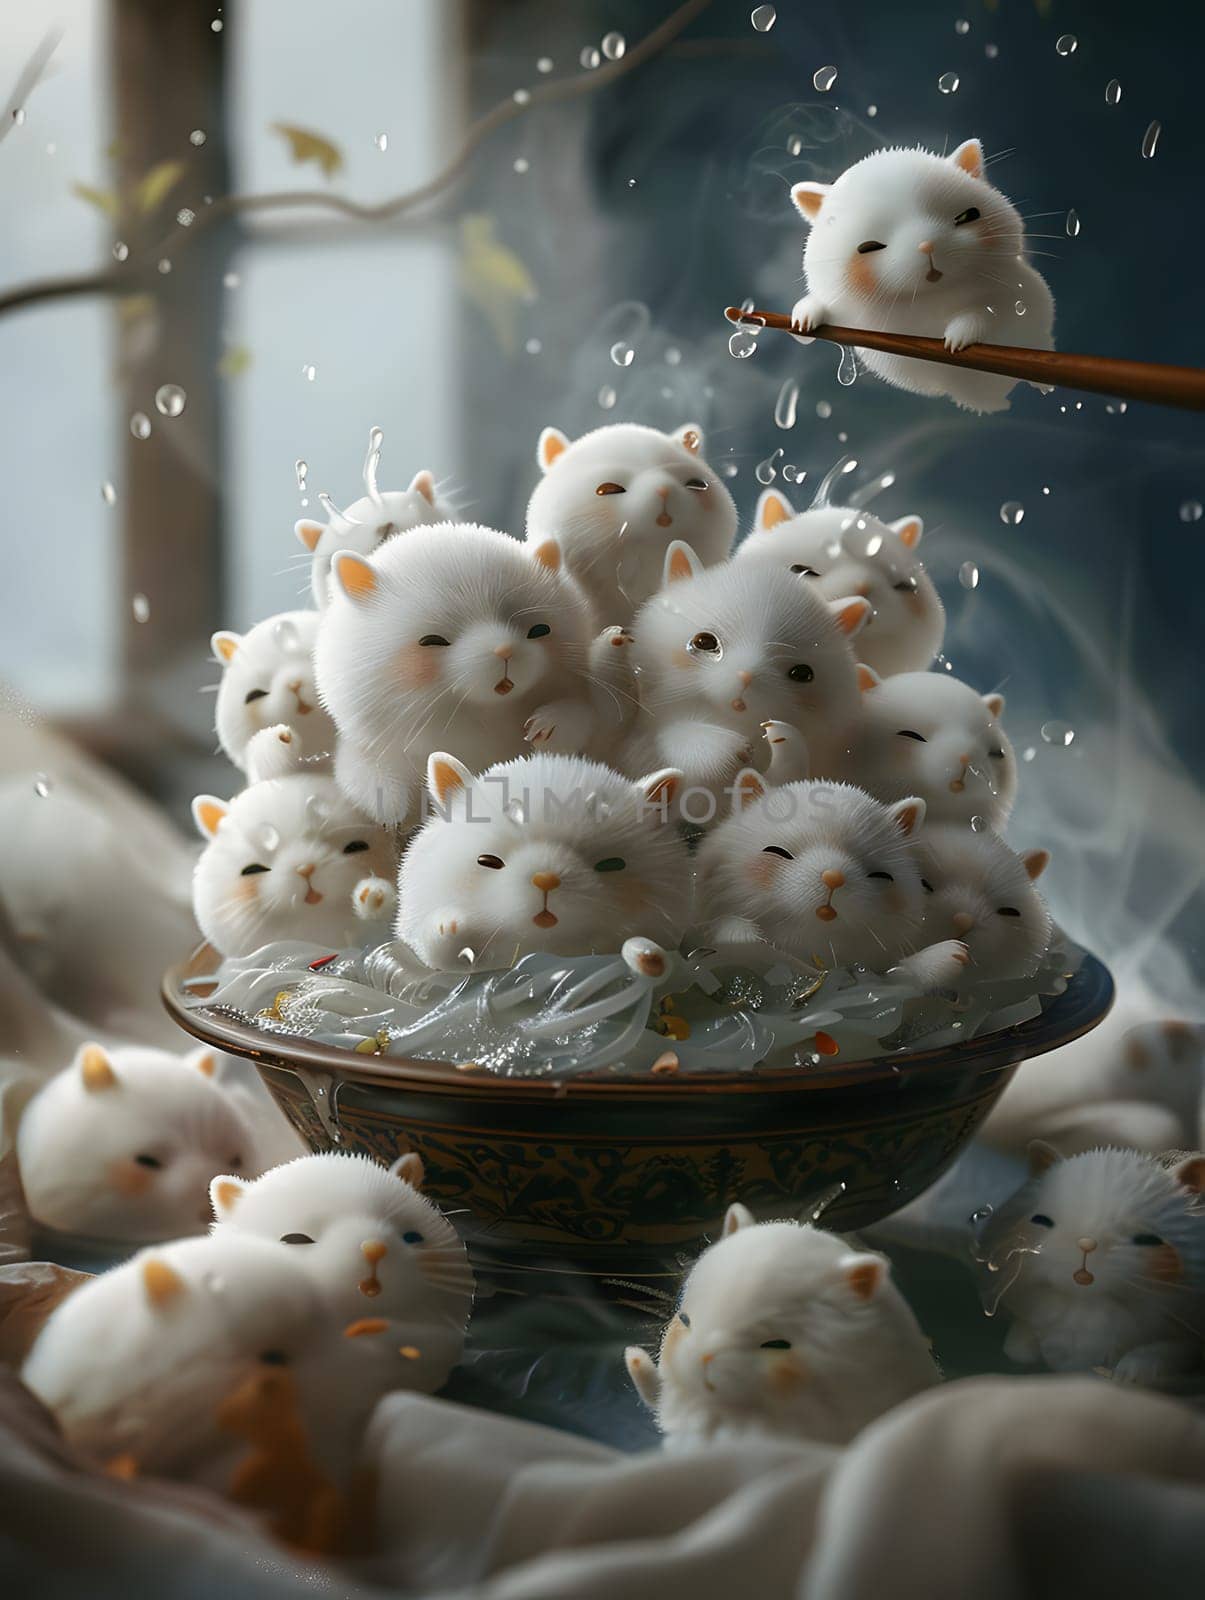 A white glass dish holds a winterinspired still life photography scene with toy stuffed animals sitting in water, resembling a comforting comfort food recipe